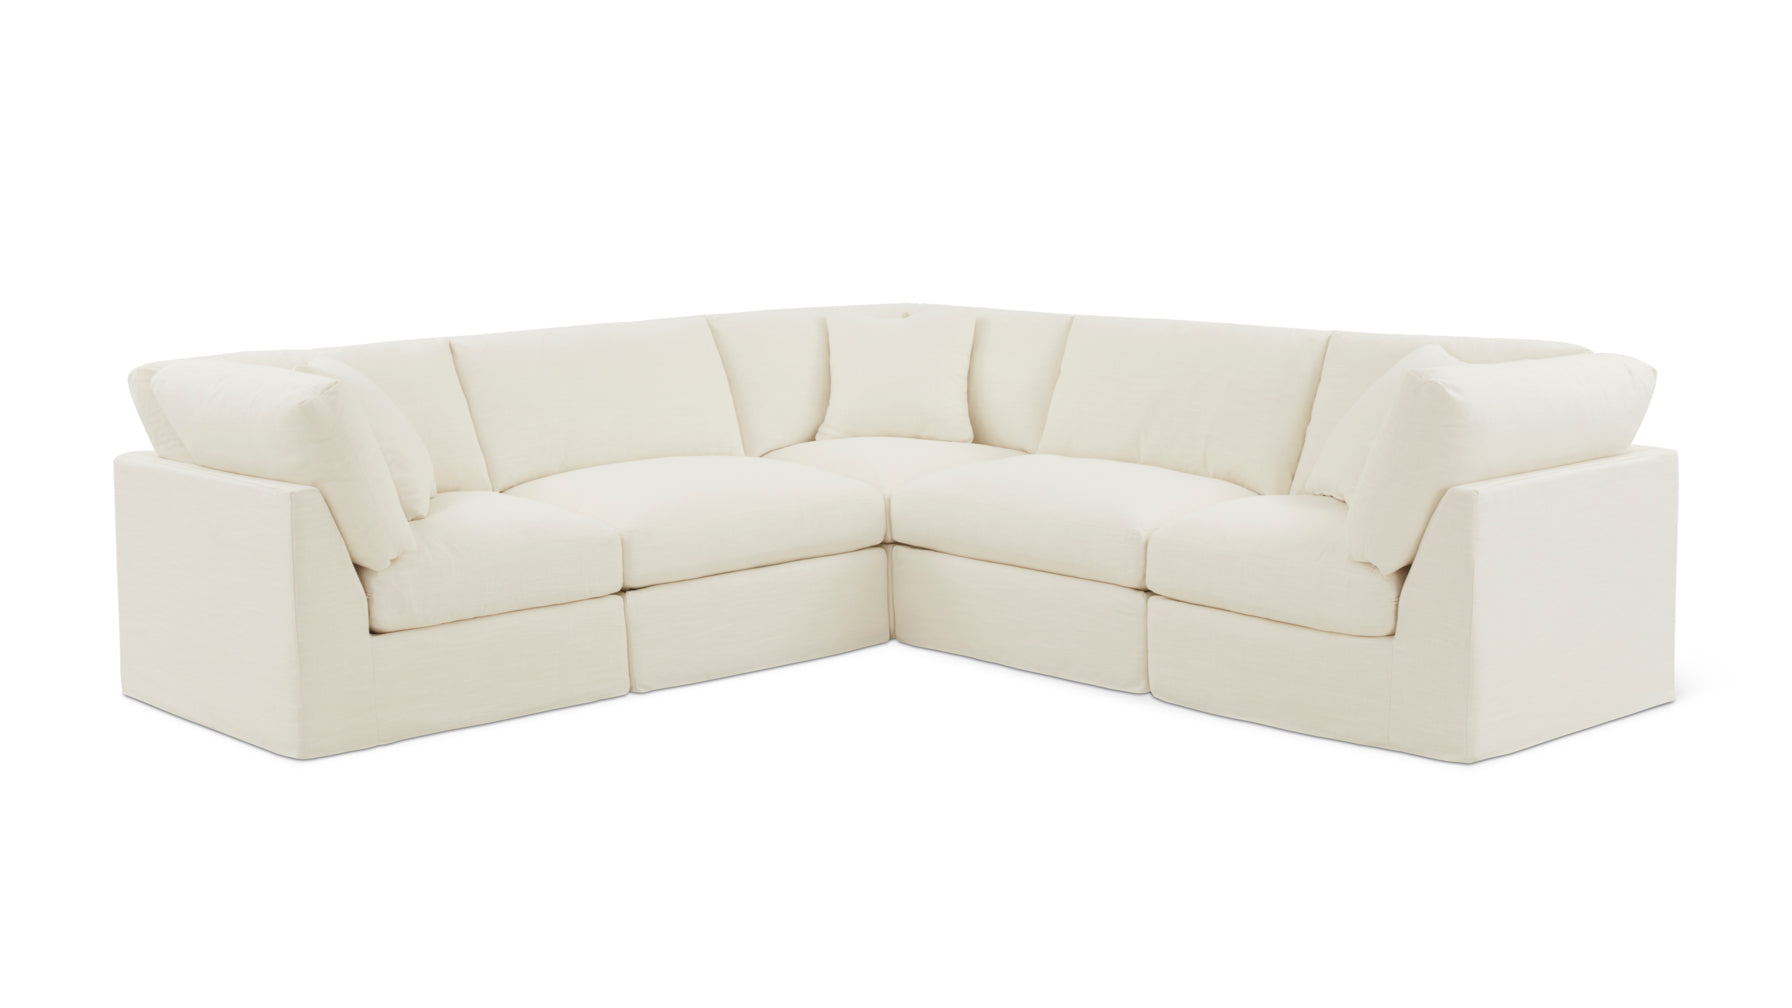 Get Together™ 5-Piece Modular Sectional Closed, Standard, Cream Linen - Image 4